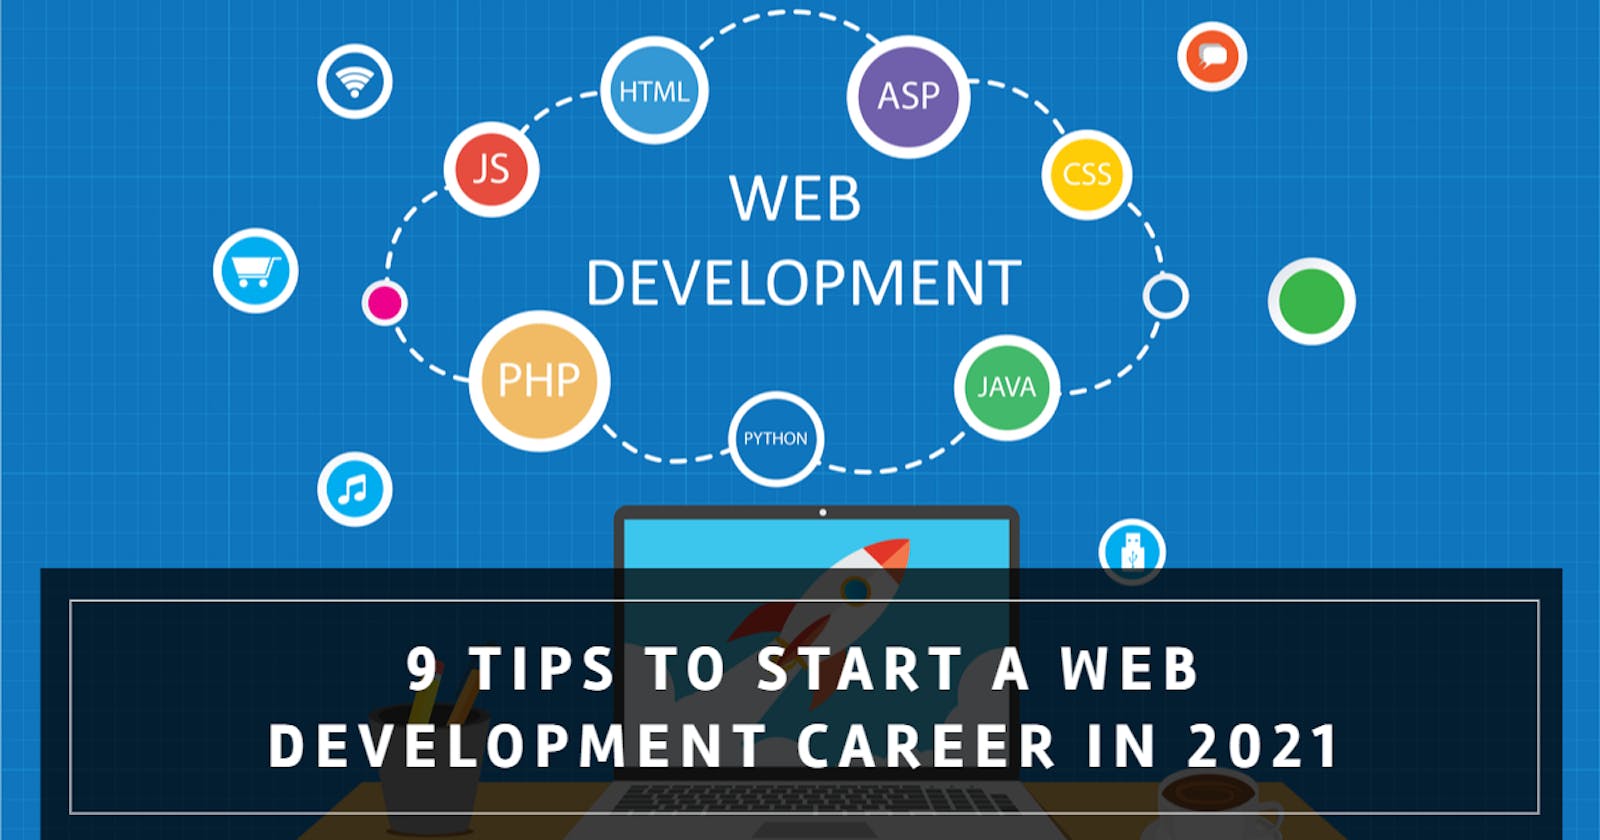 9 Tips To Start a Web Development Career in 2021